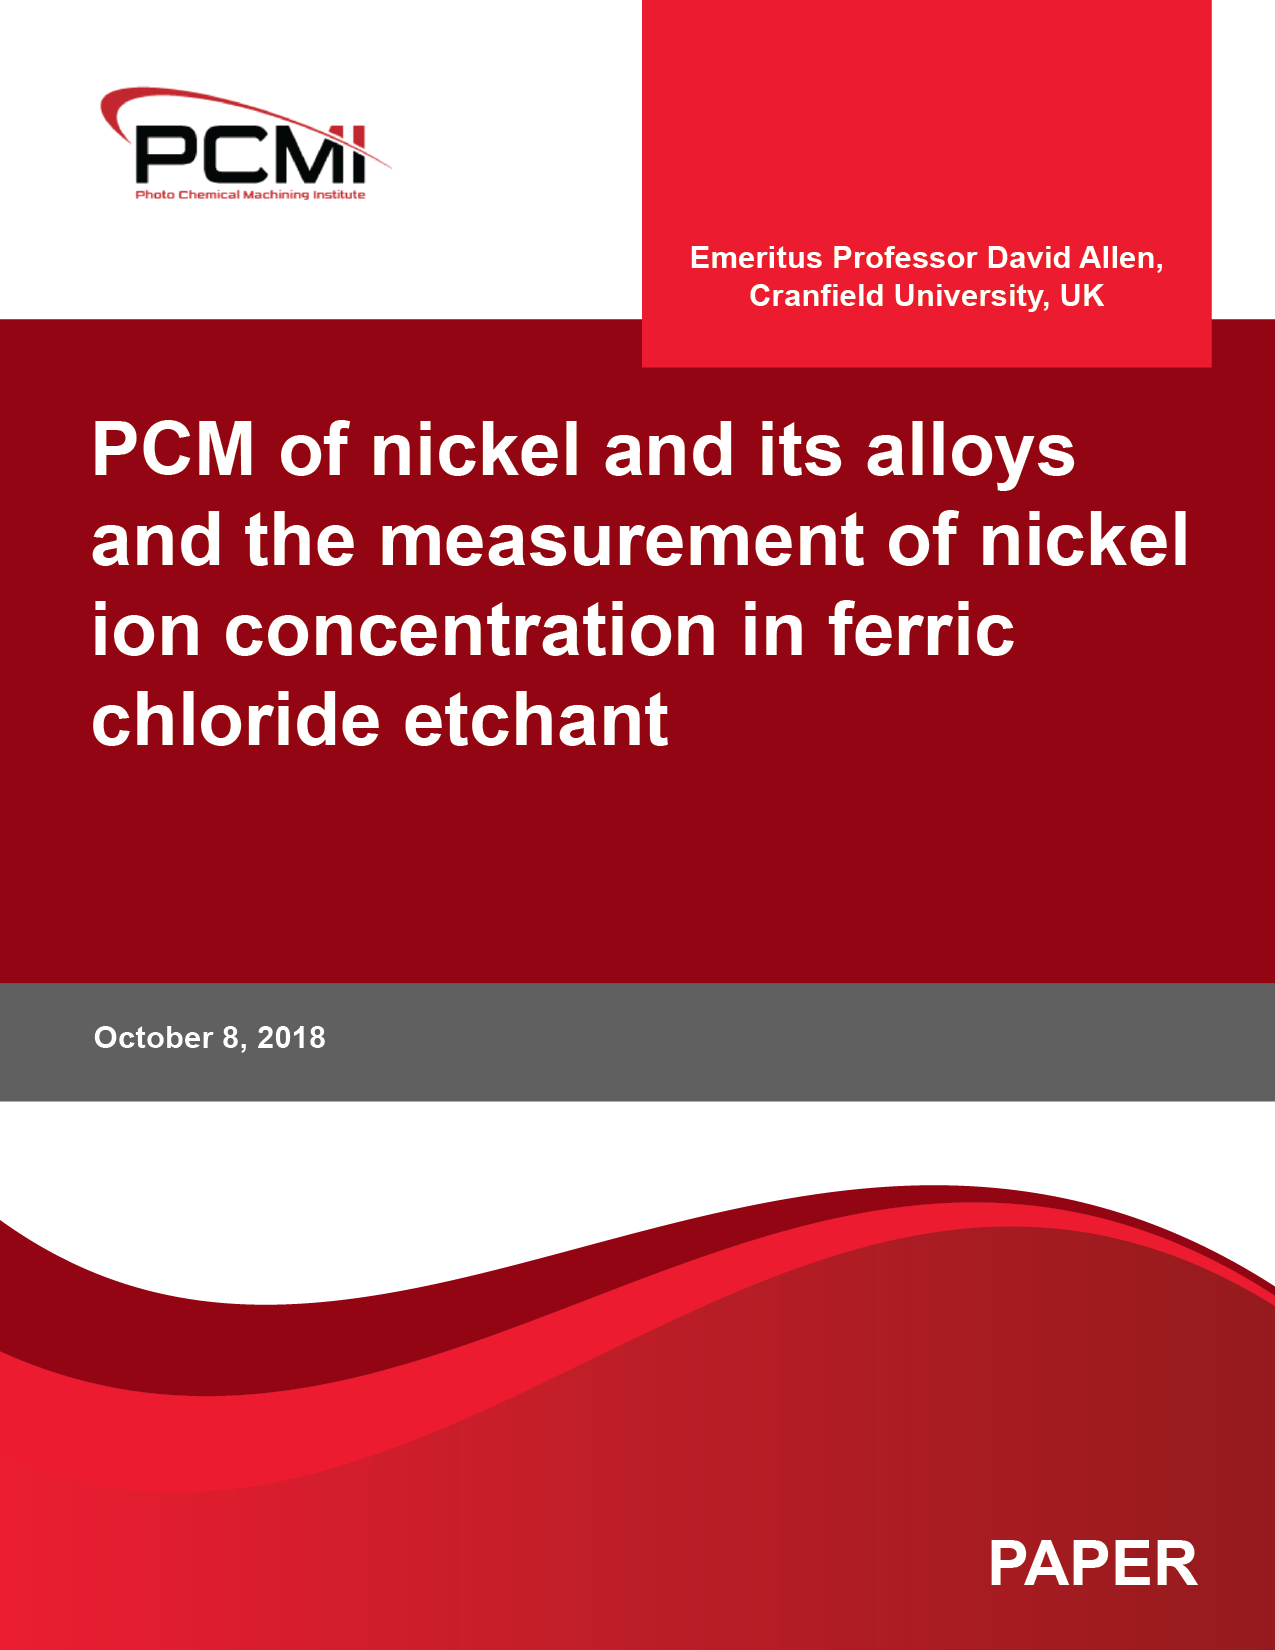 PCM of nickel and its alloys and the measurement of nickel ion concentration in ferric chloride etchant